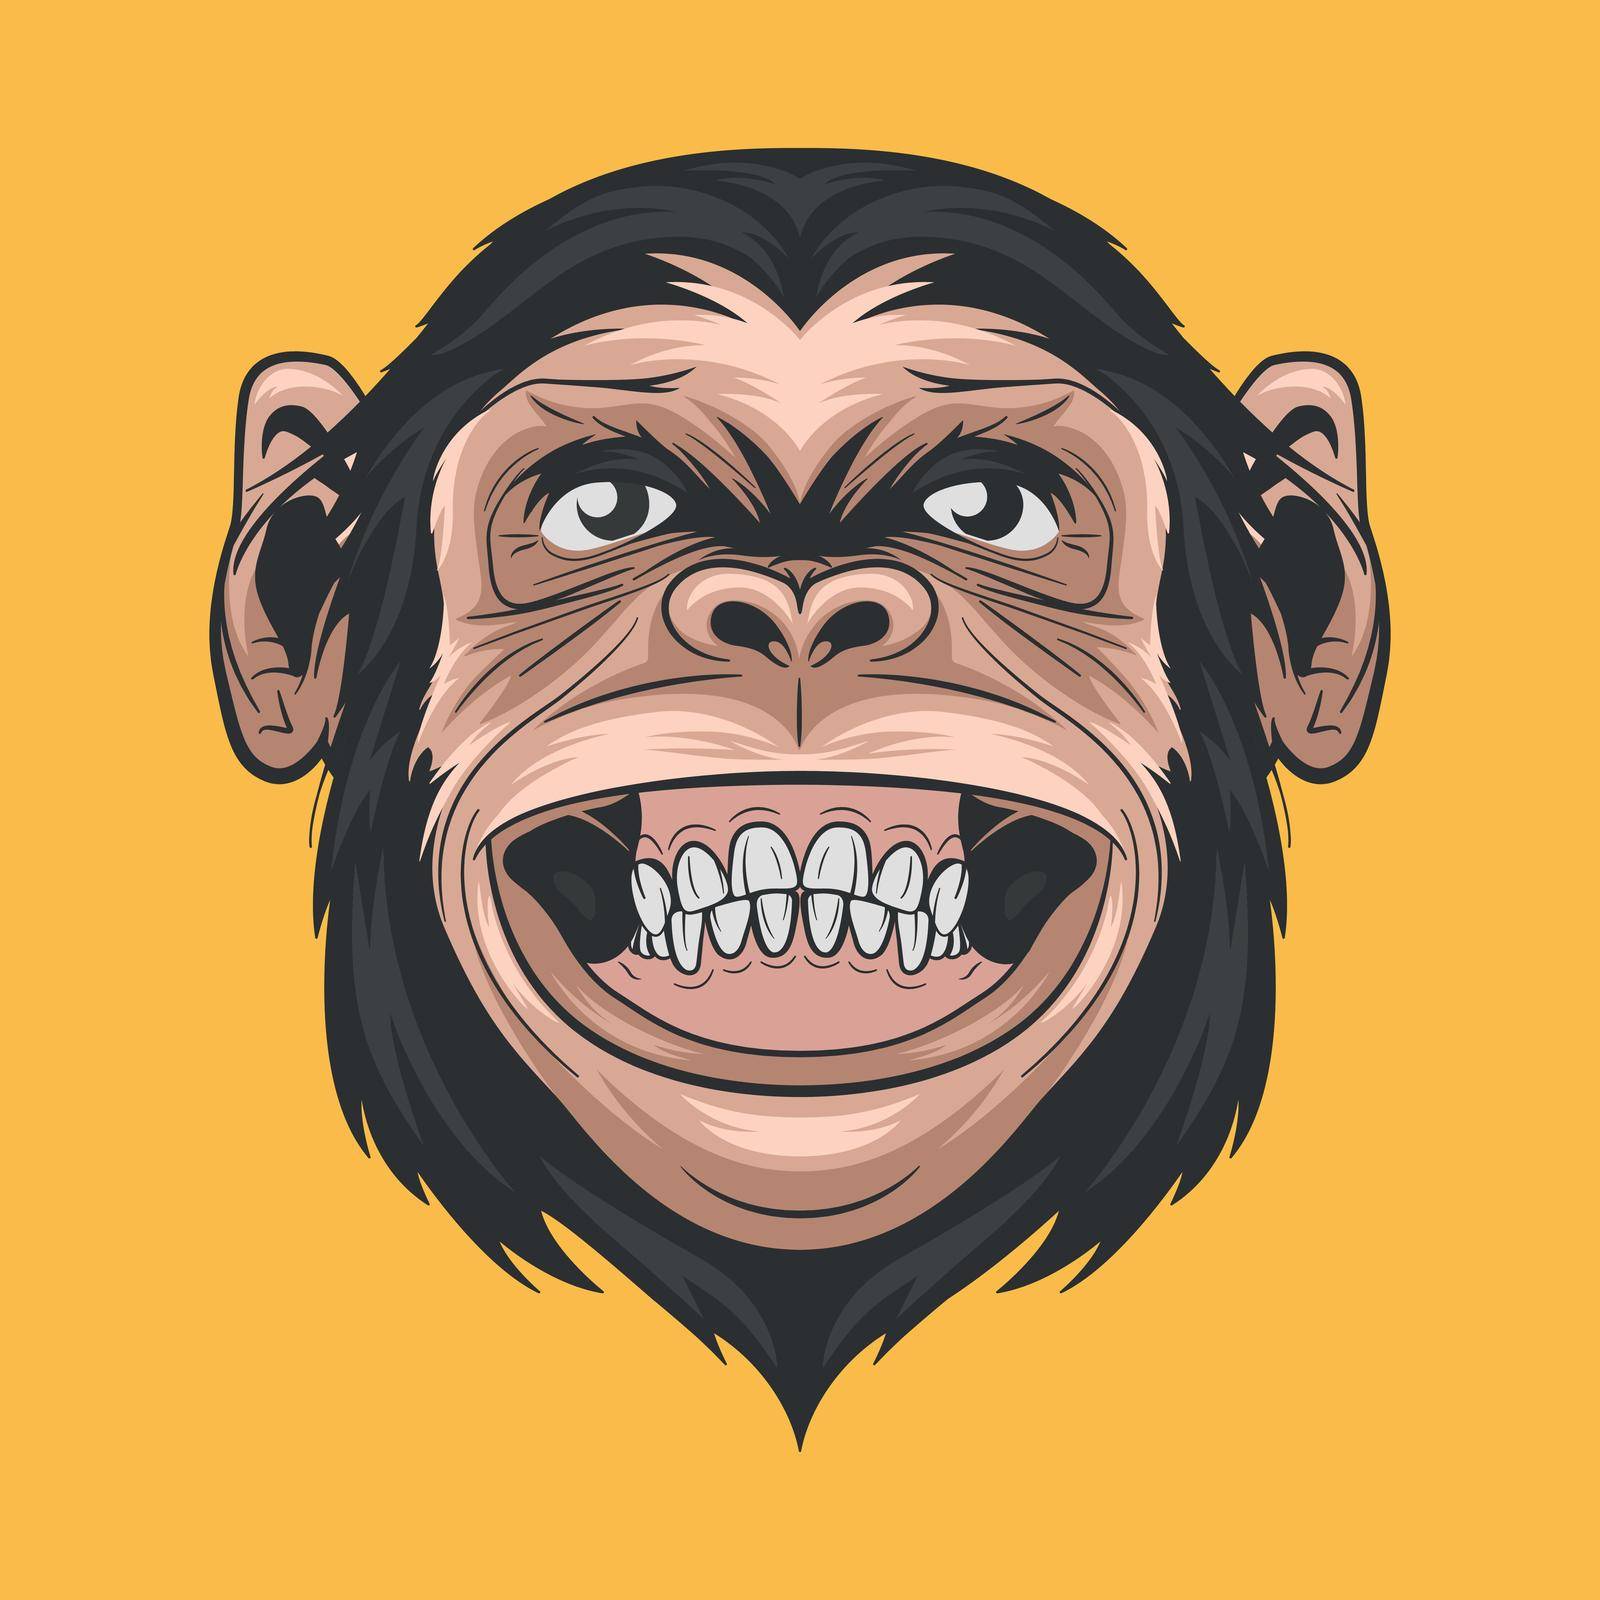 Vector Hand Drawn Smiling Chimpanzee Ape . Colored Abstract Funny Monkey Head for Wall Art, T-shirt Print, Poster. Cartoon Cute Chimp Monkey Icon, Logo, Illustration by Gomolach